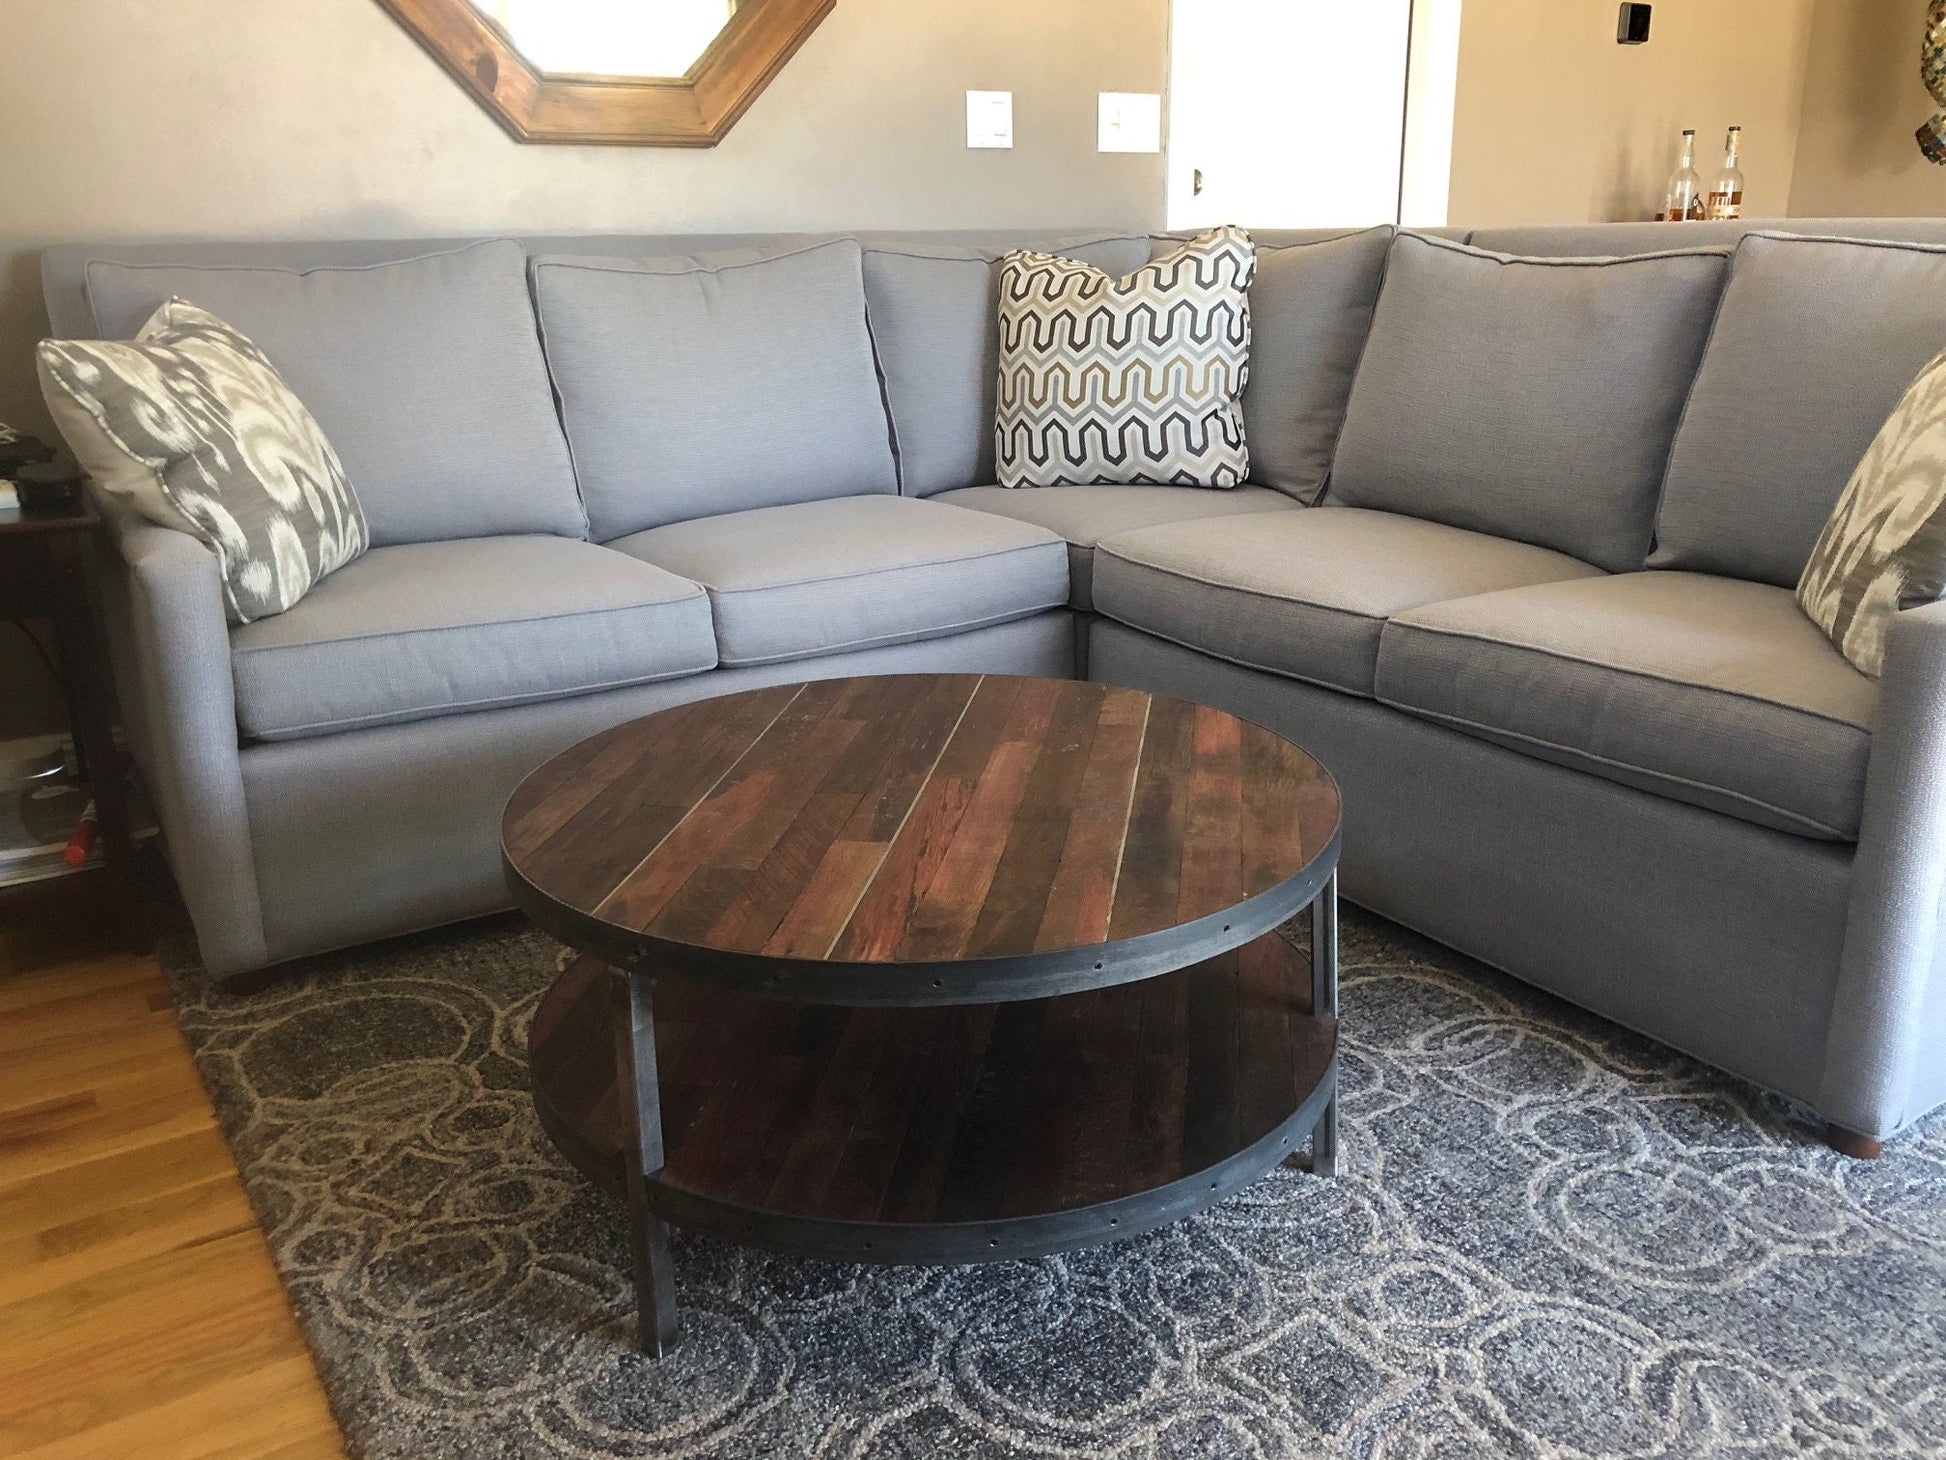 Wine Barrel Coffee Table - Kolo - Made from large reclaimed California oak wine tanks 100% Recycled!